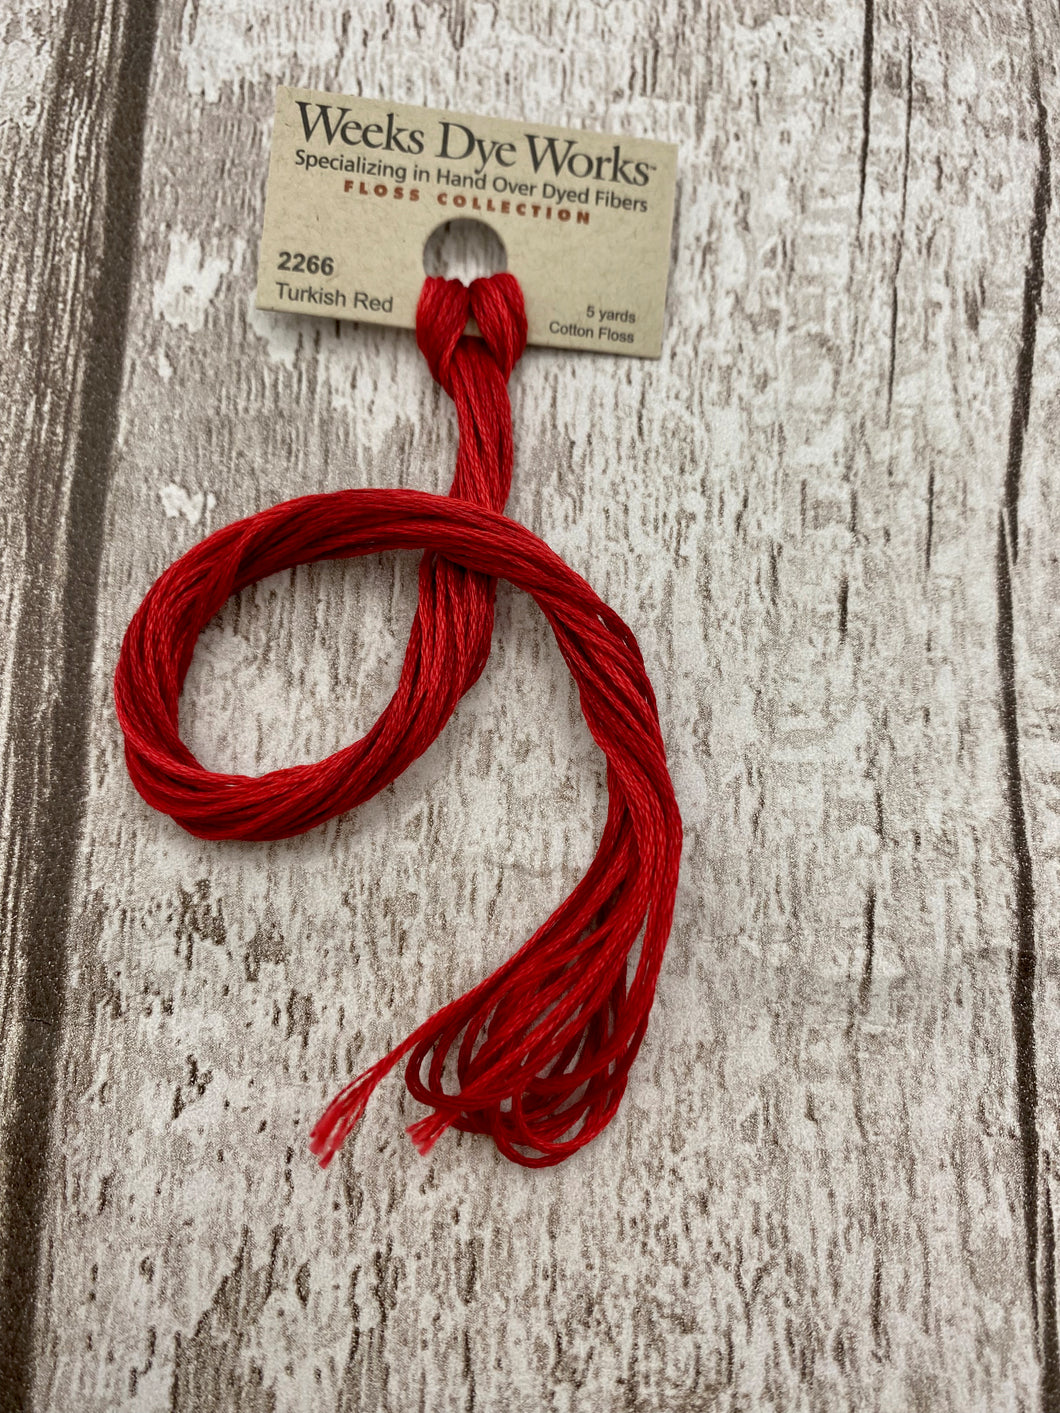 Turkish Red (#2266) Weeks Dye Works 6-strand cotton floss